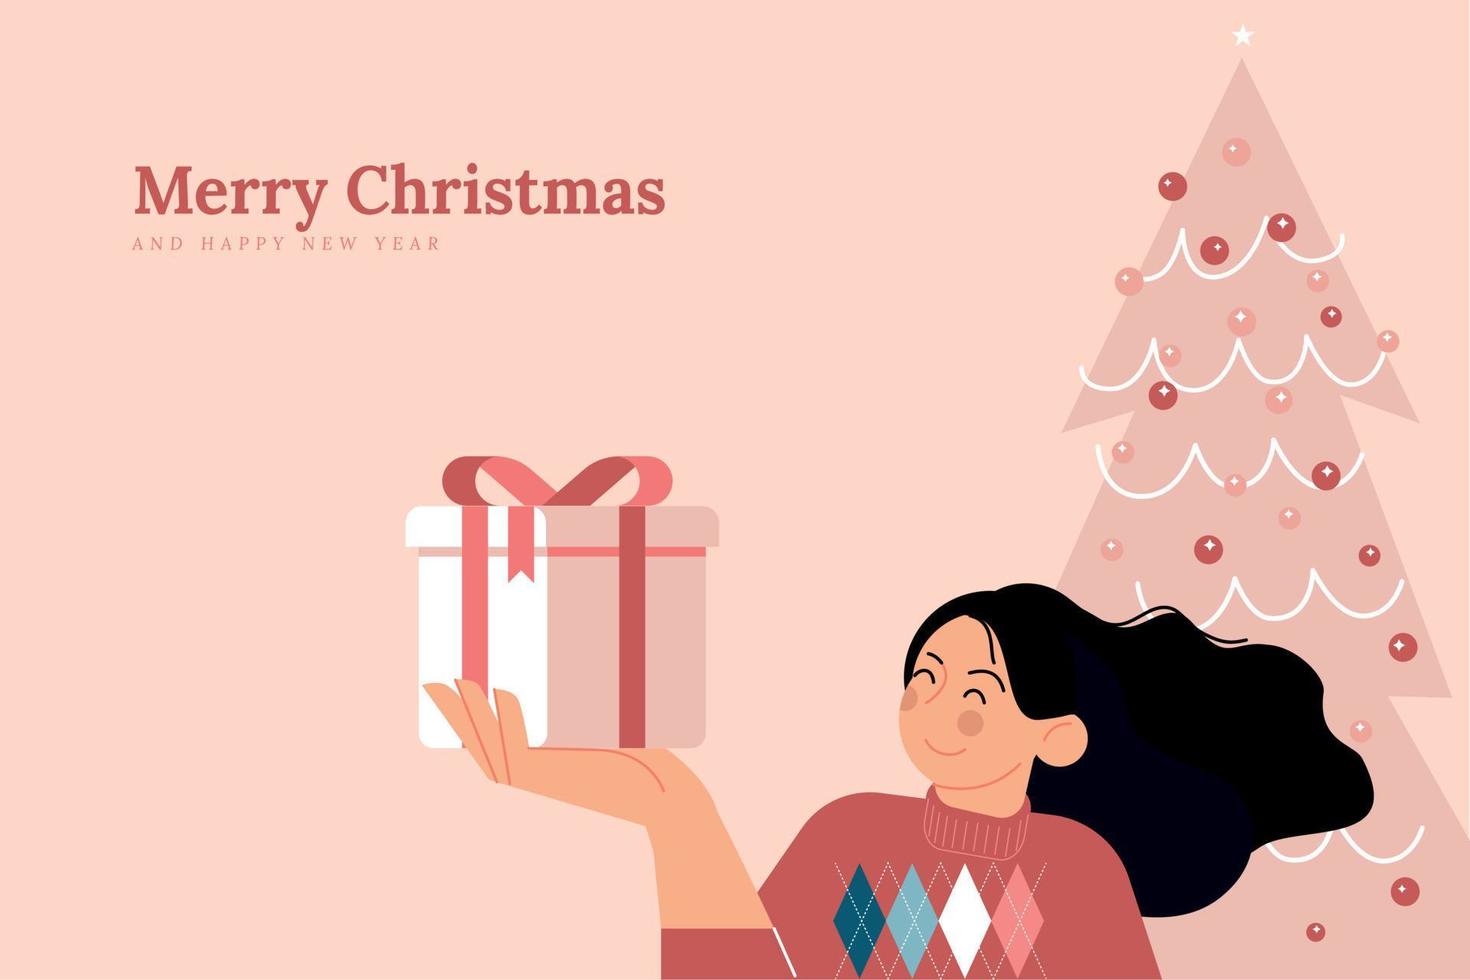 Merry Christmas and Happy New Year. Vector illustration for background, greeting card, party invitation card, website banner, social media banner, marketing material.